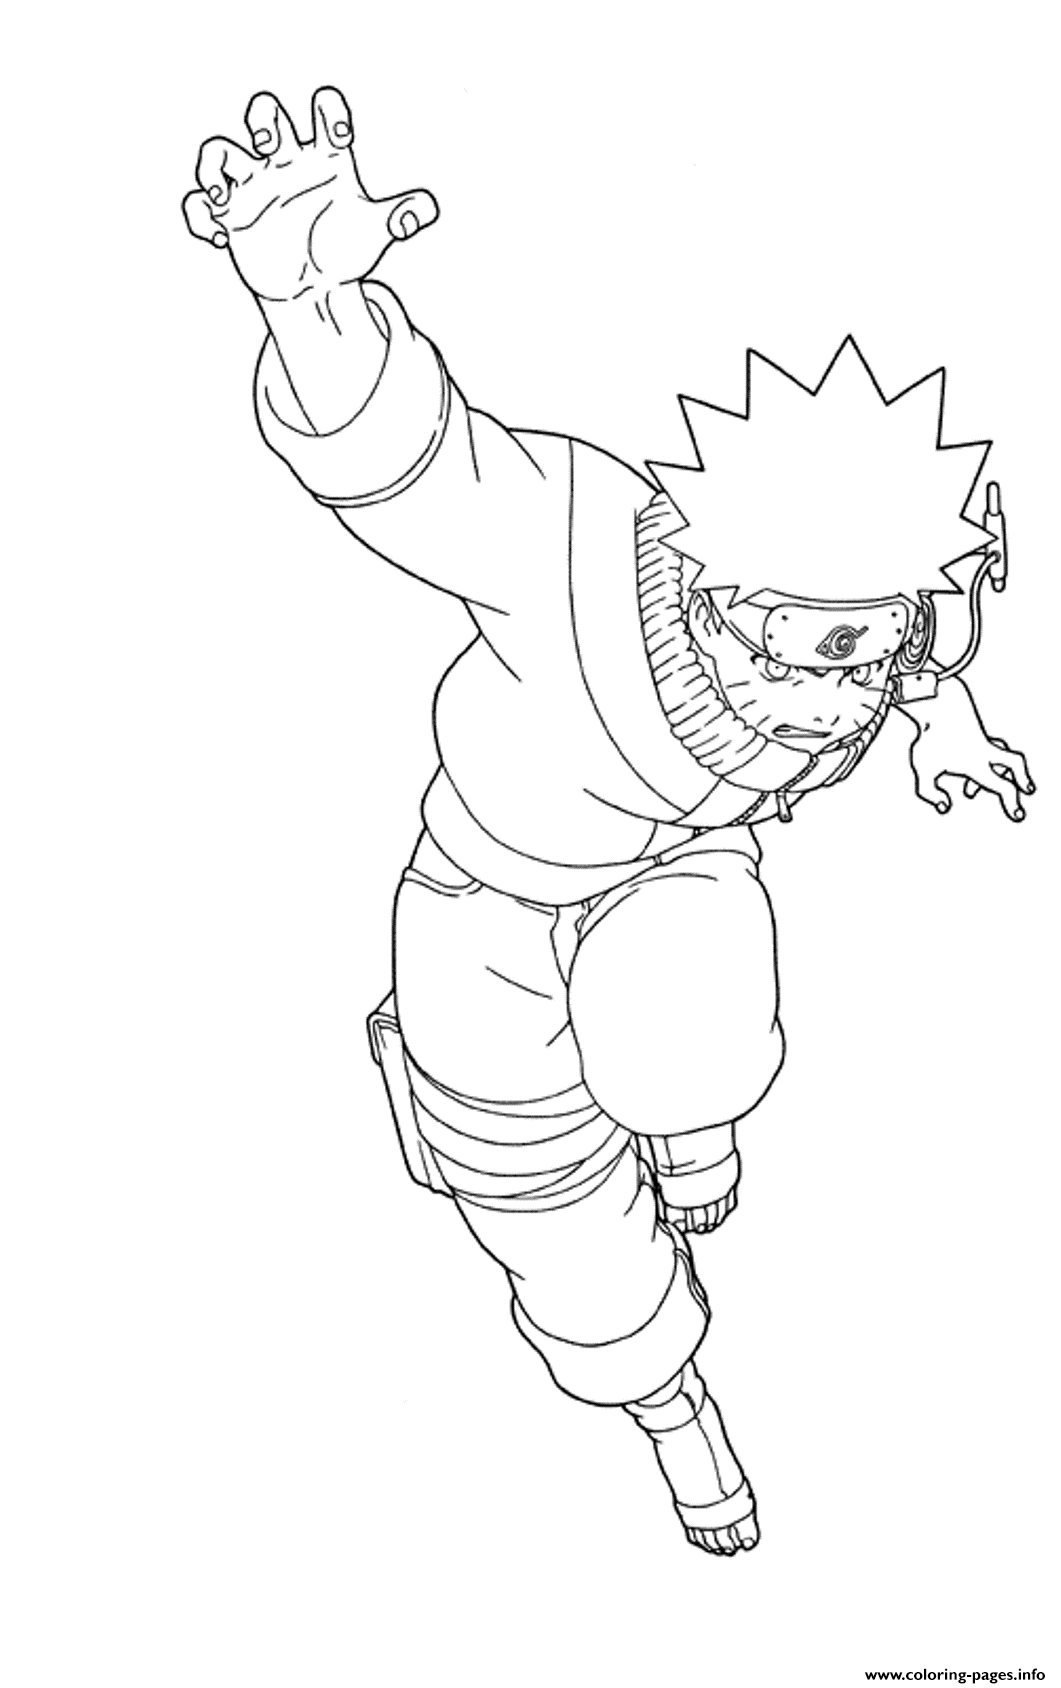 Anime Naruto Coloring Pages Coloring Pages Anime Naruto Fighting2b18 Coloring Pages Printable